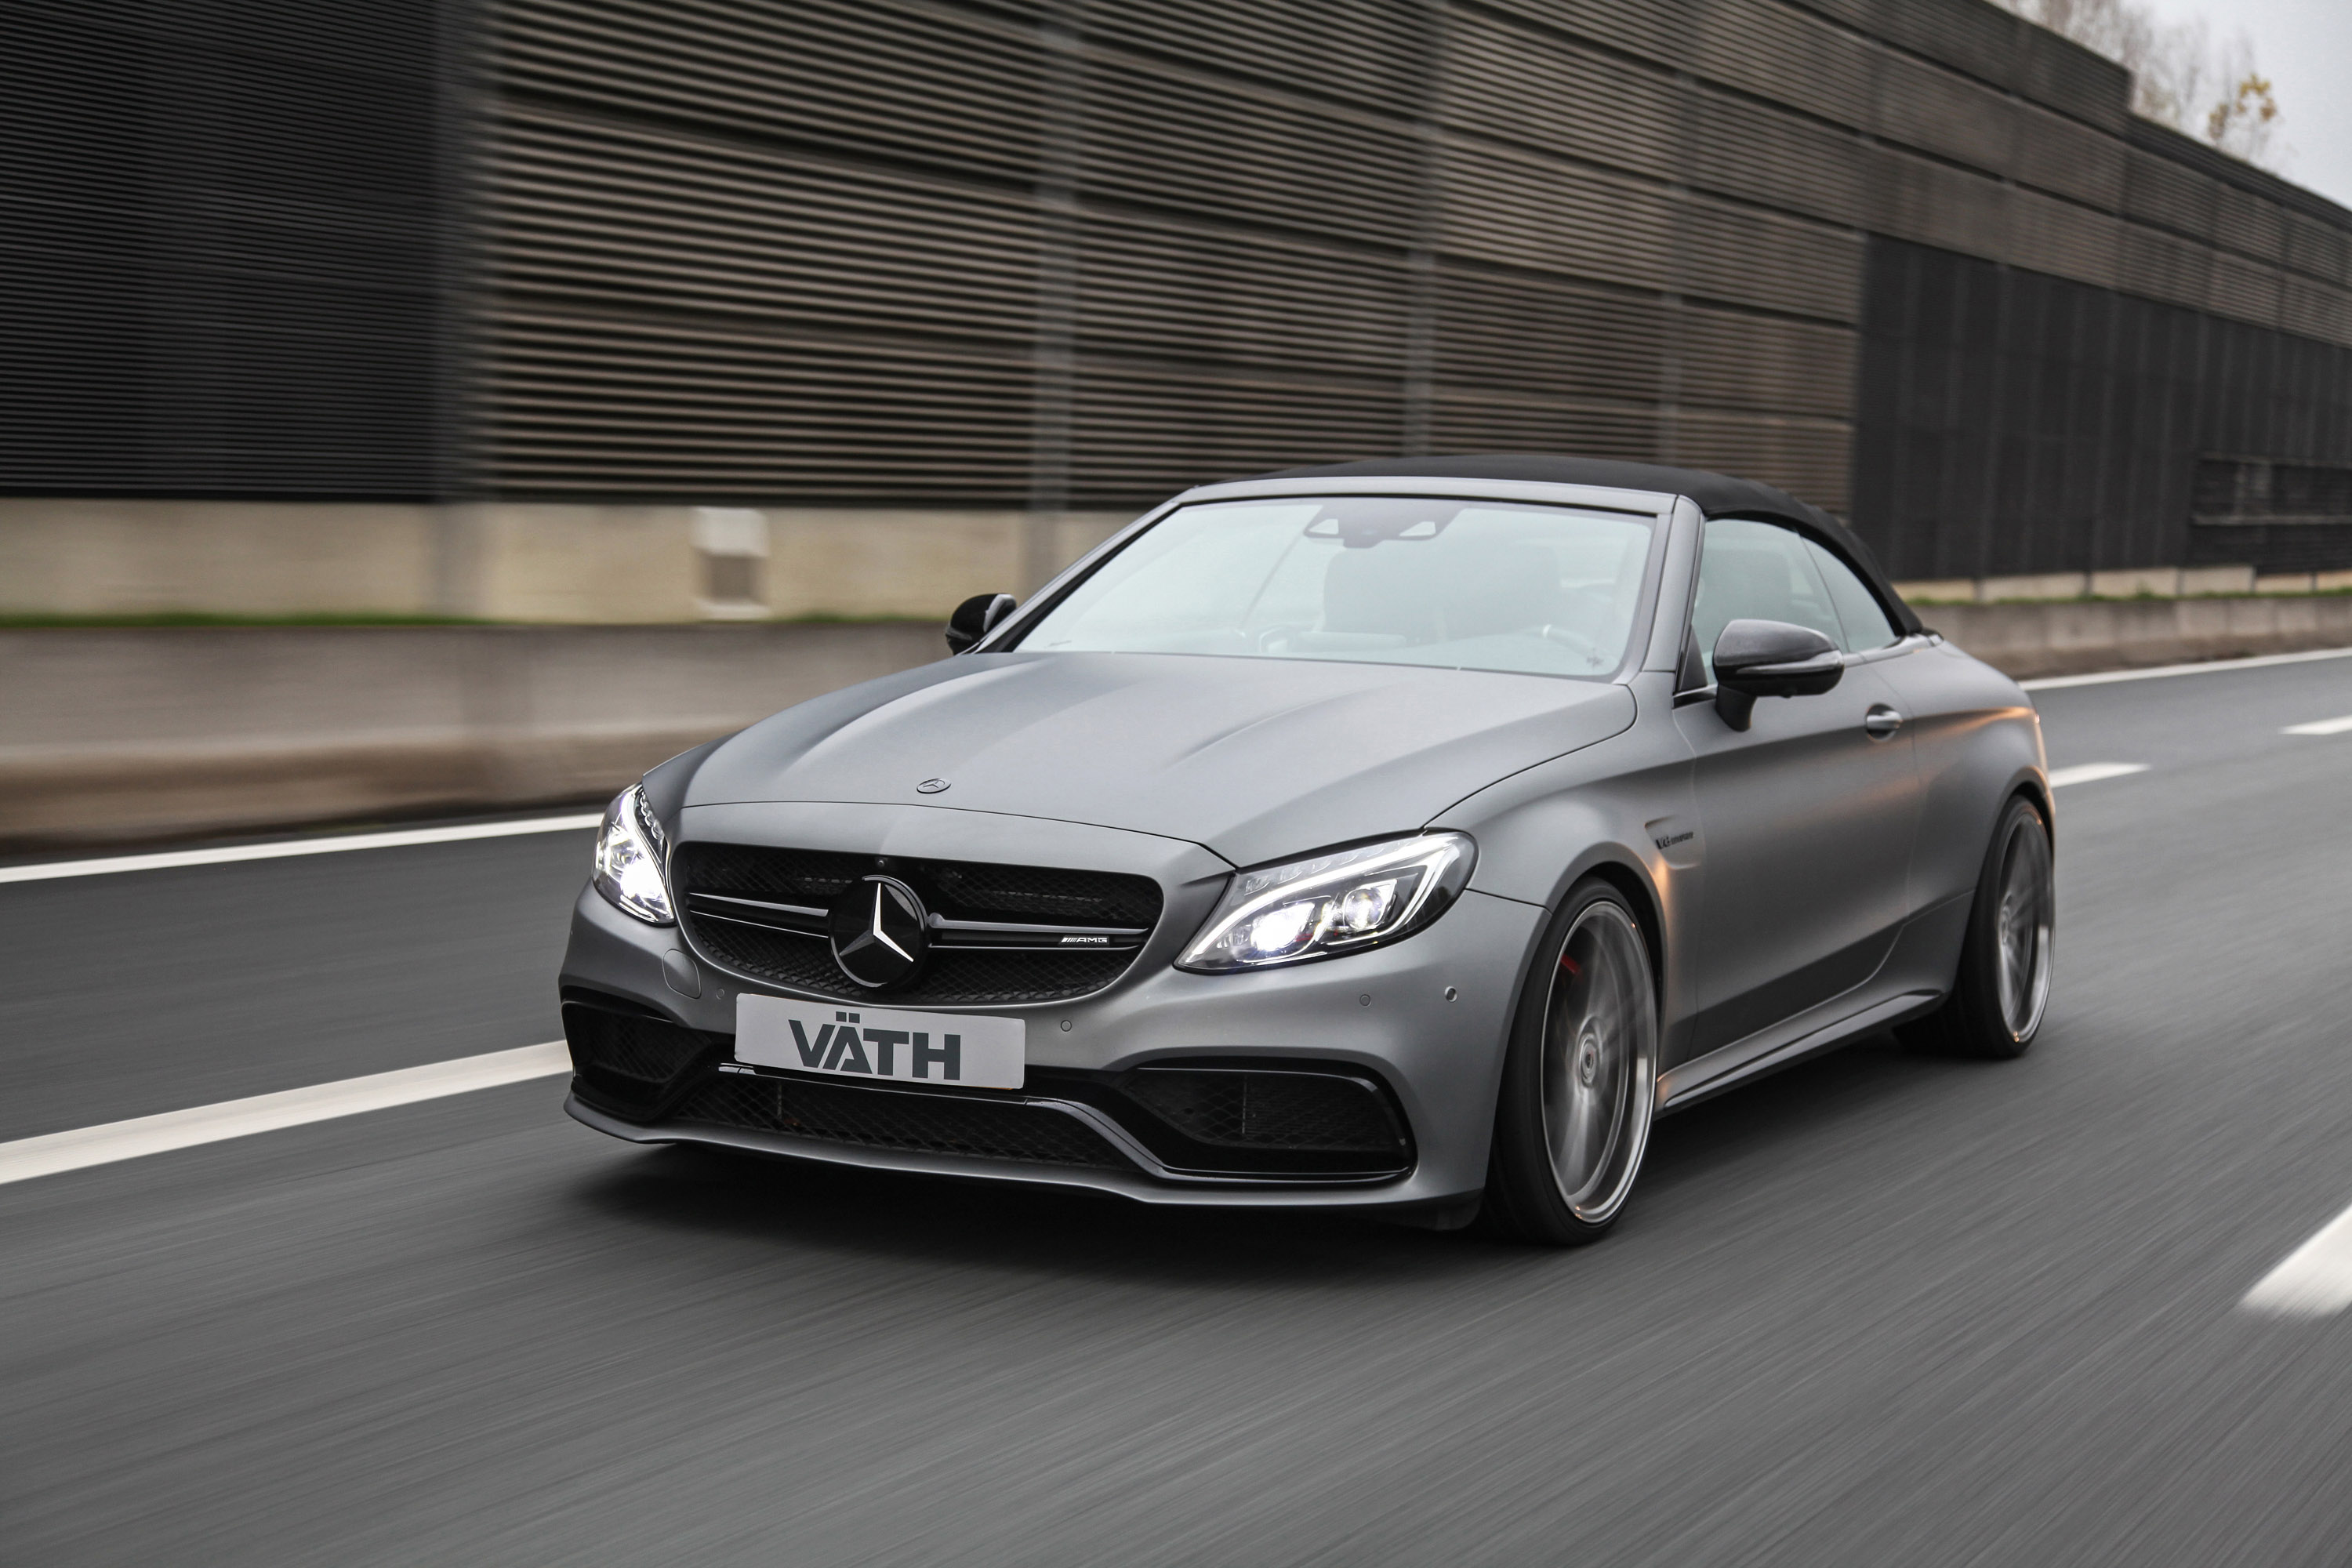 VATH Mercedes-AMG C-Class Coupe and Cabriolet